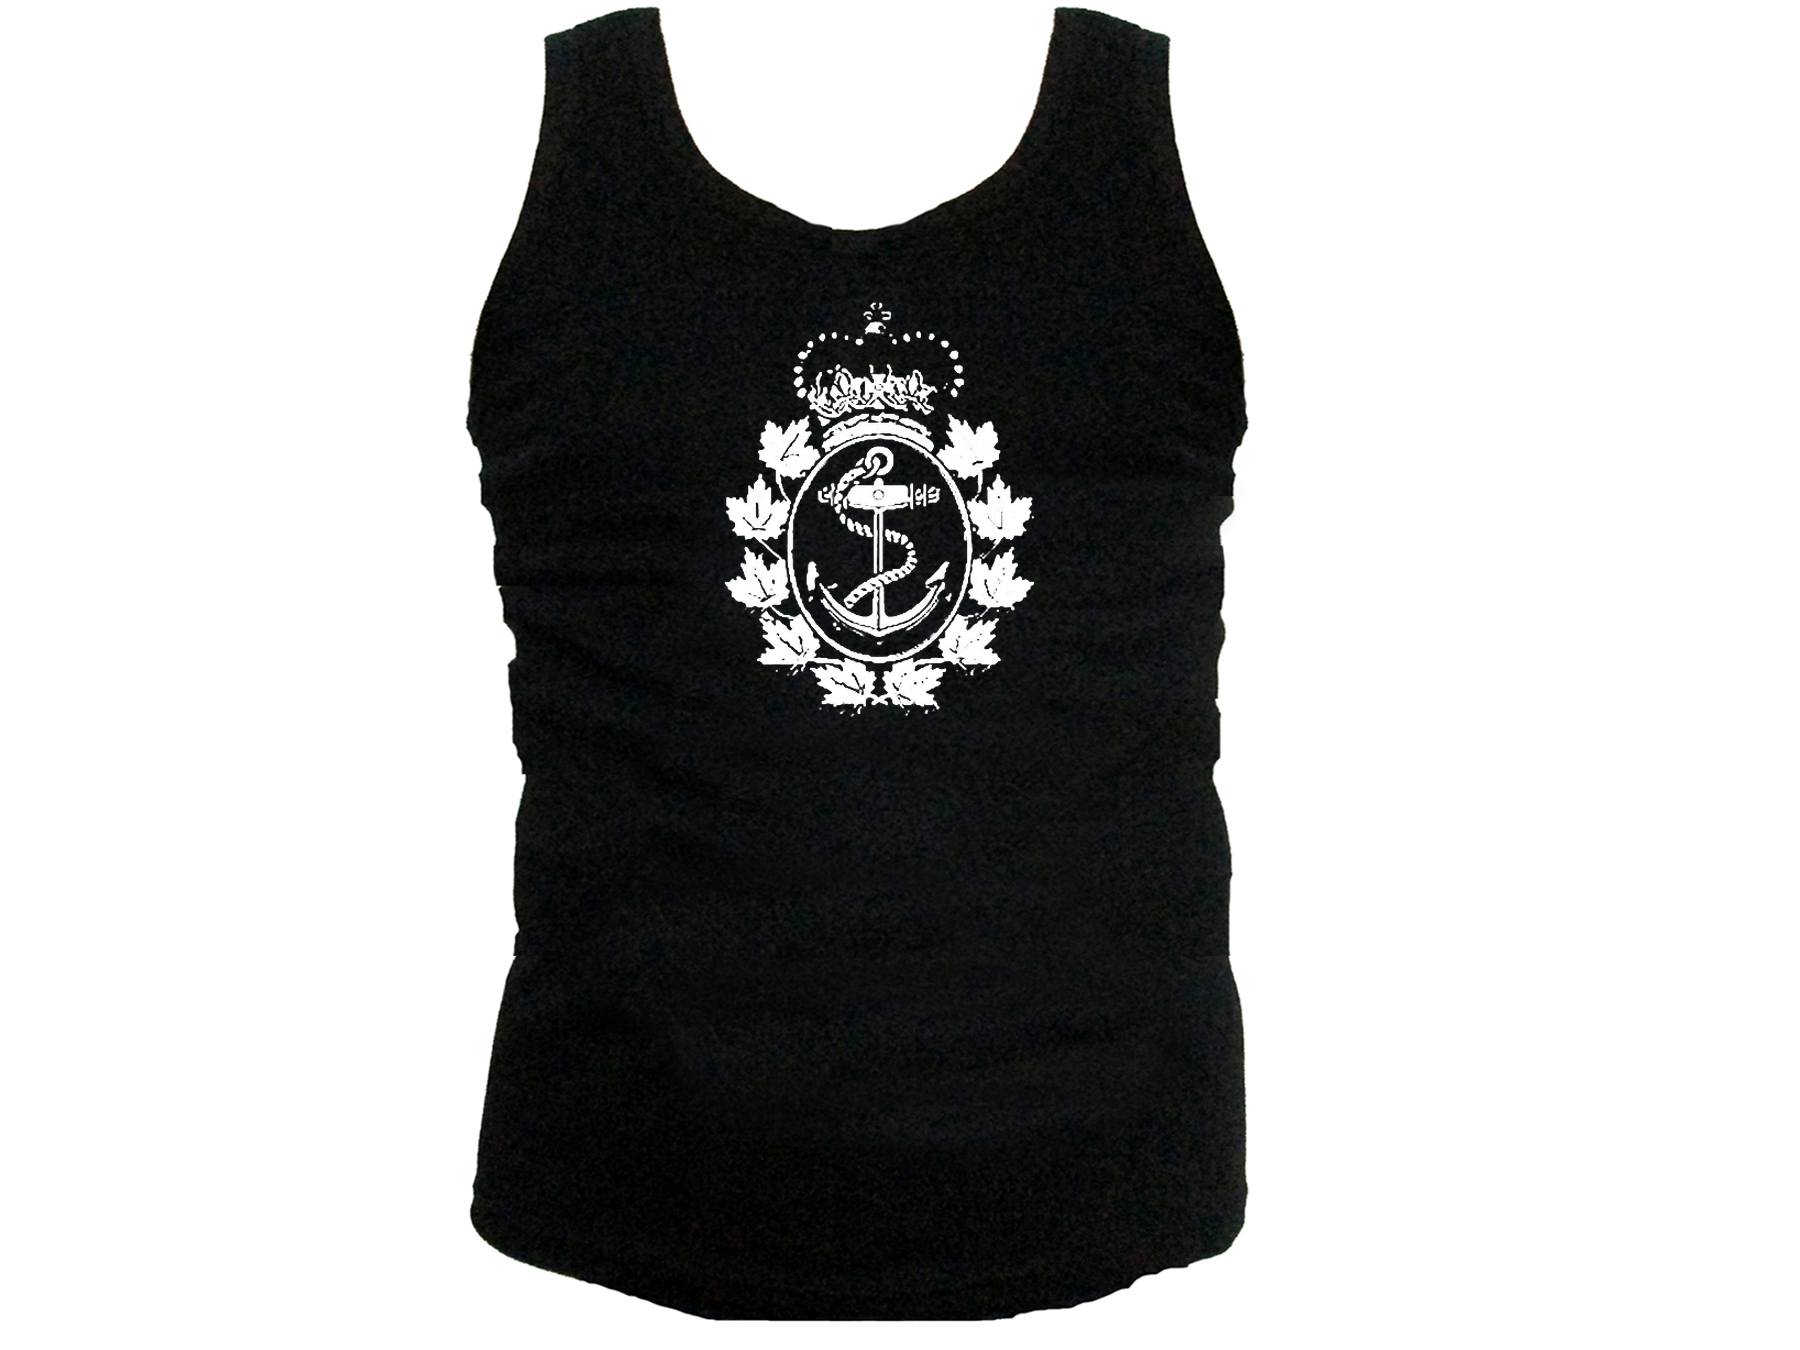 Canadian navy forces emblem mens muscle tank top